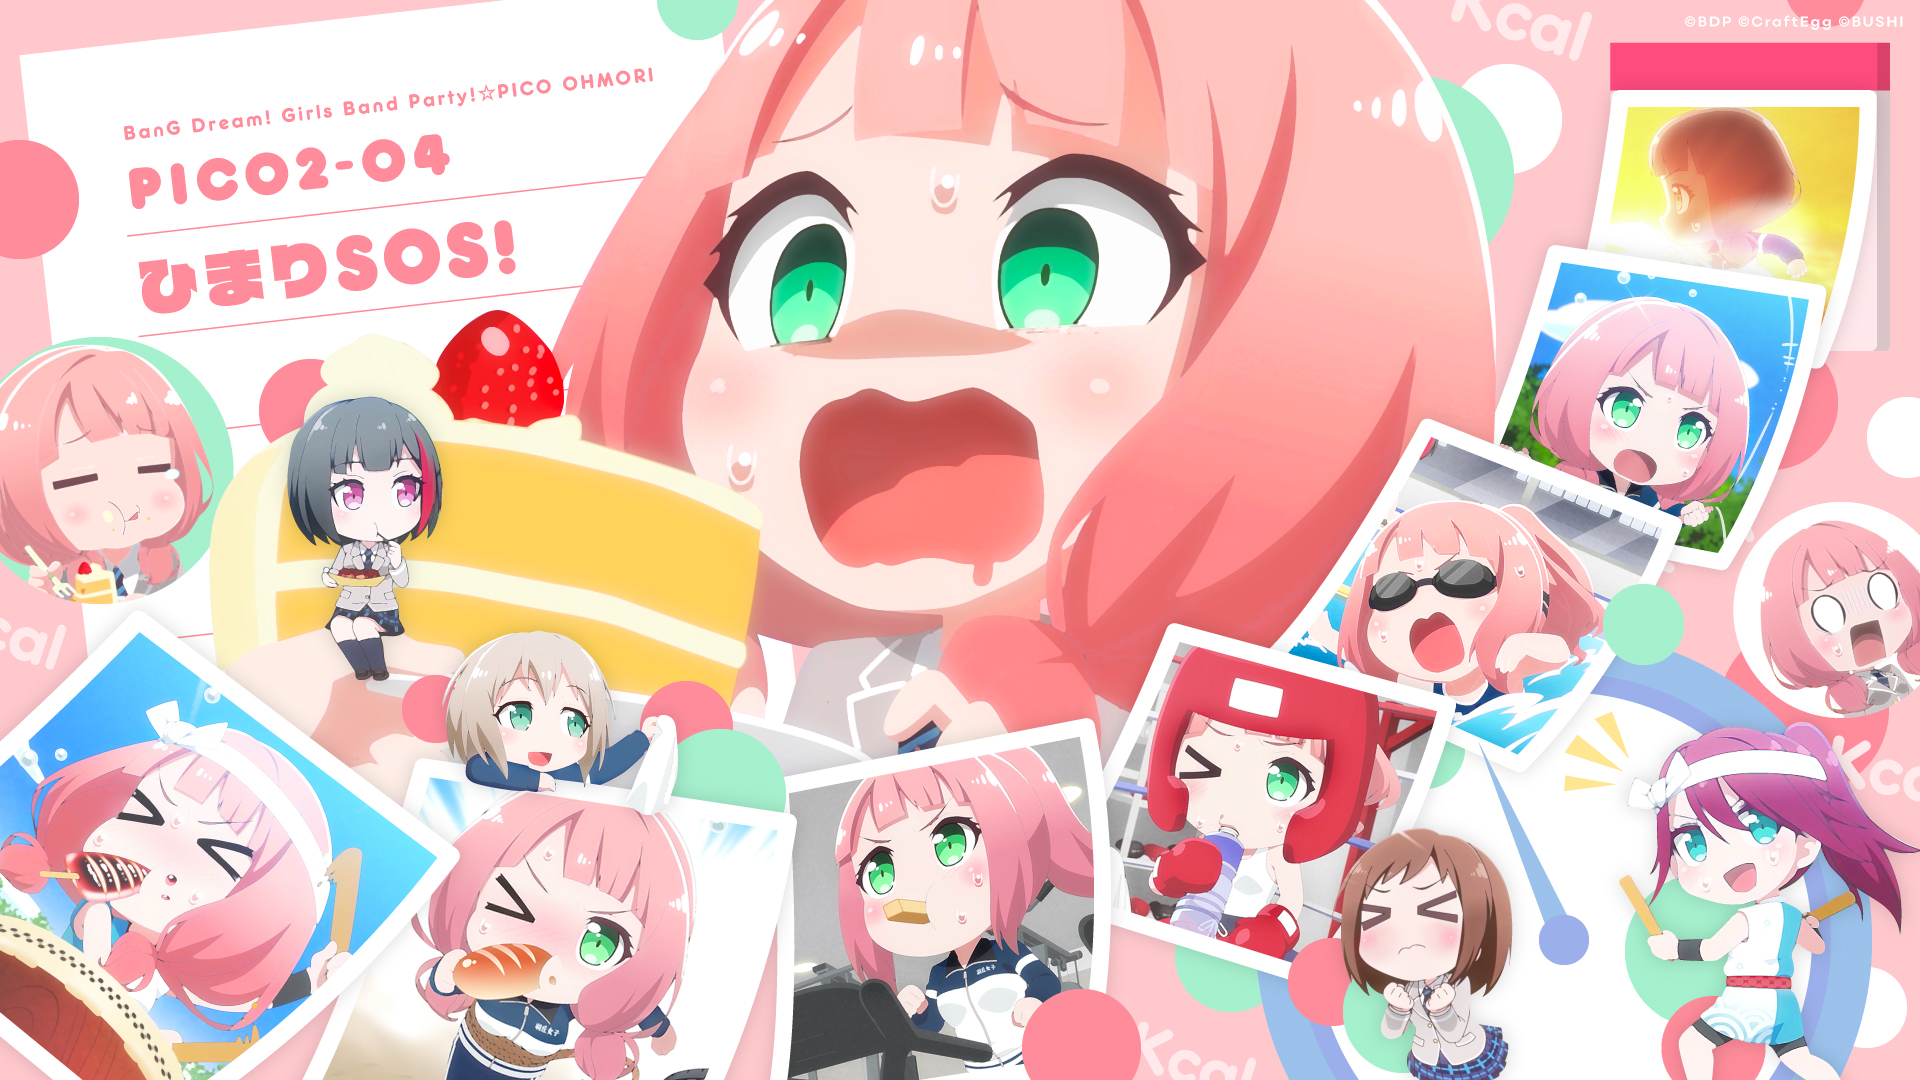 Official Himari Wallpaper Pc Mobile To Celebrate The Release Of